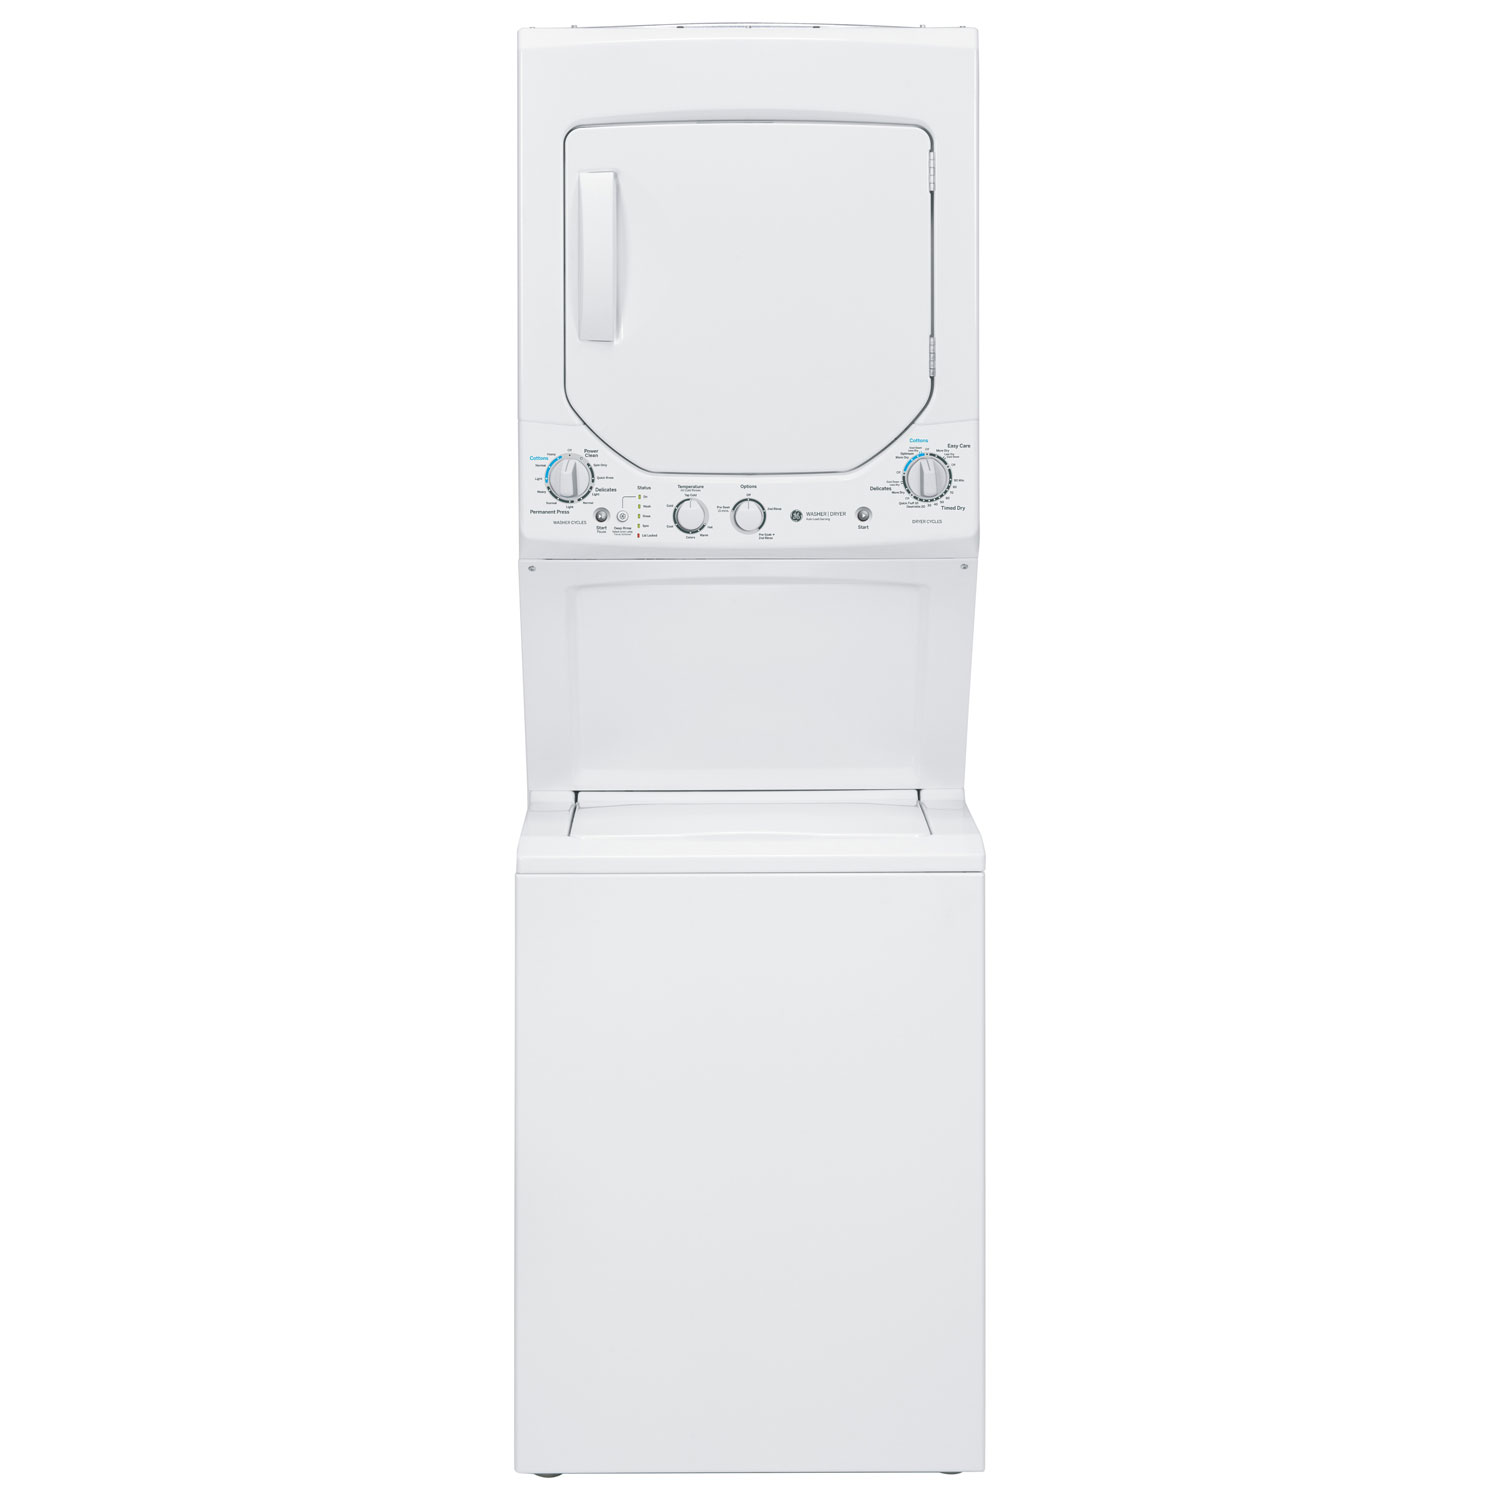 GE 2.6 Cu. Ft. Electric Washer & Dryer Laundry Centre (GUD24ESMMWW) - White